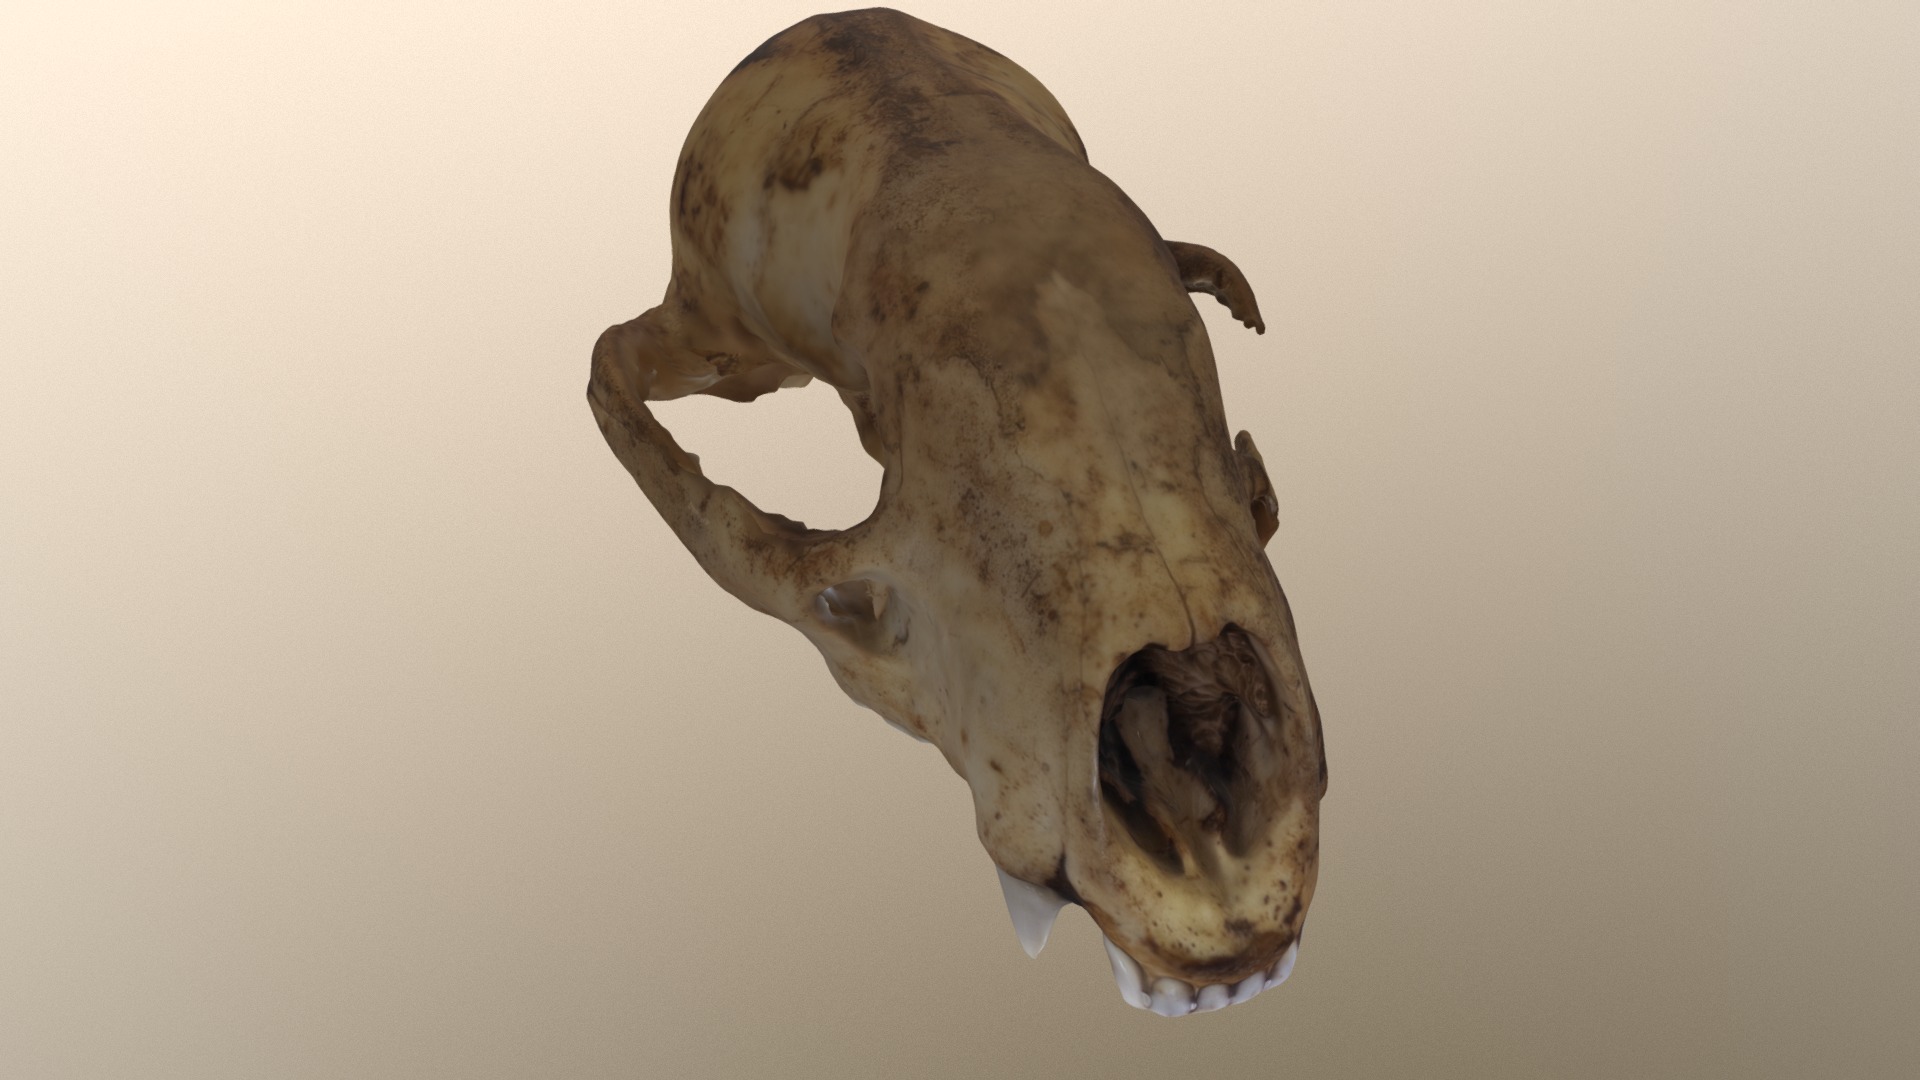 3D model Badger Skull - This is a 3D model of the Badger Skull. The 3D model is about a snail on a white background.